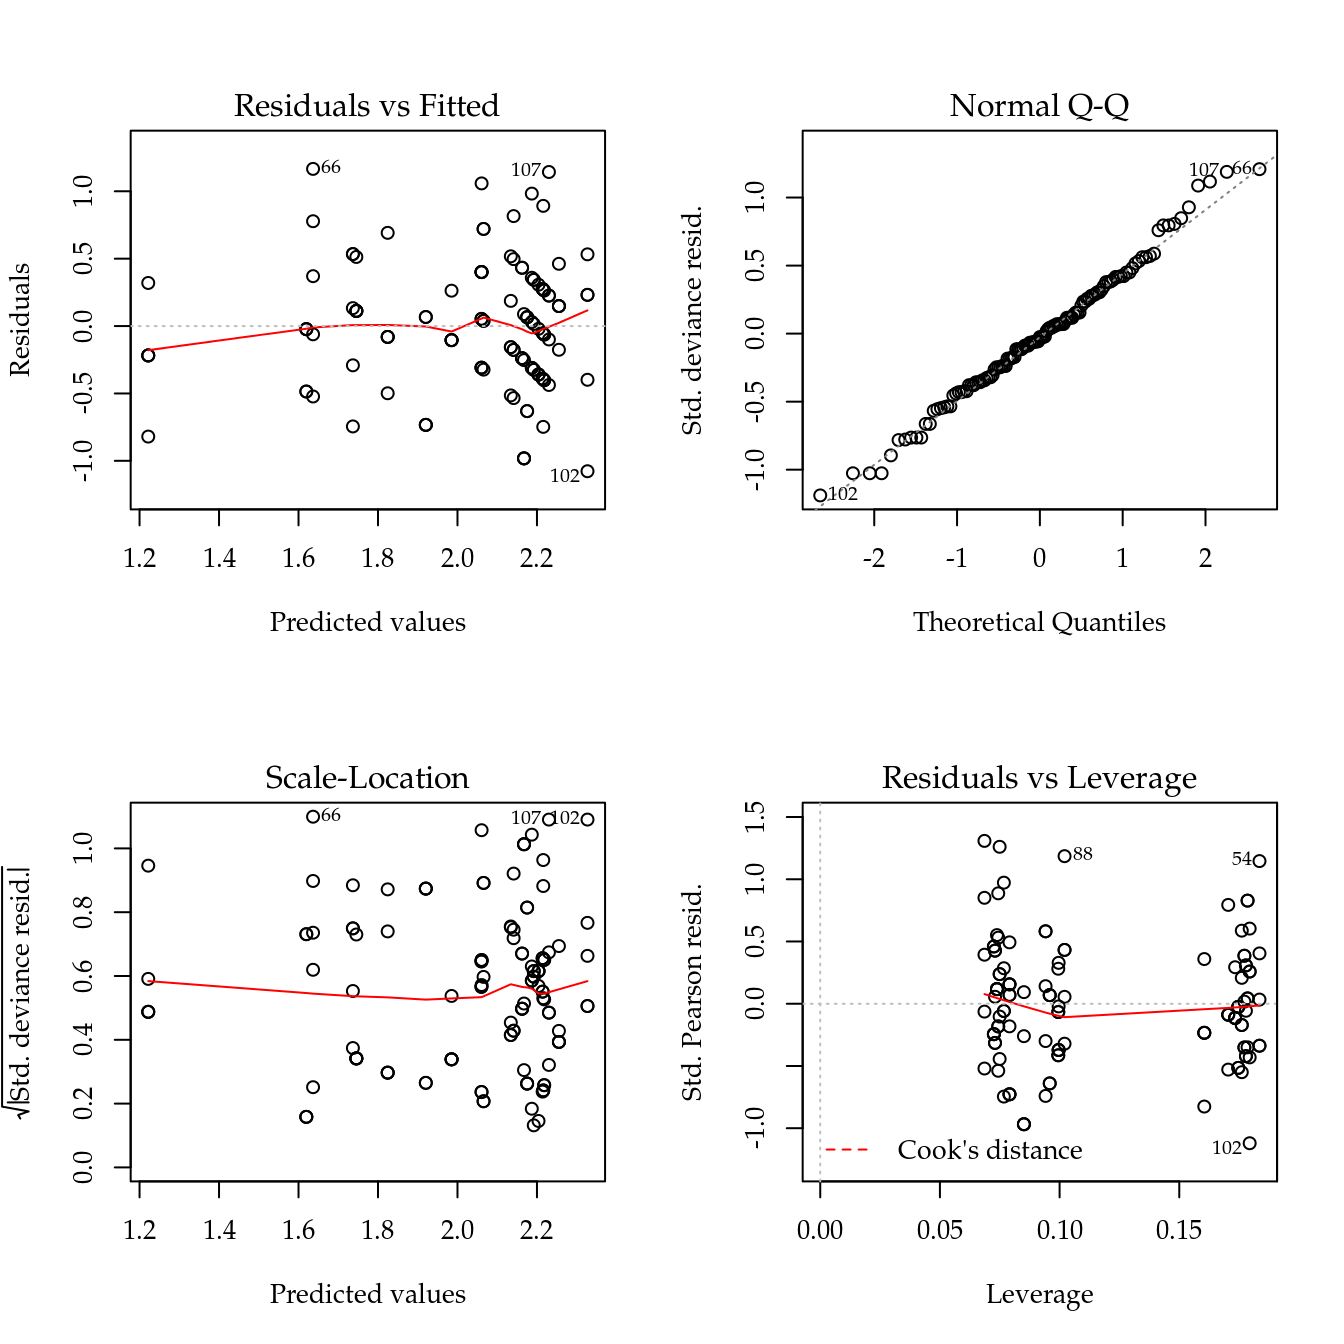 The 4 plots for checking departures of assumptions in the GLM-Poisson regression model for the number of cotton bolls.